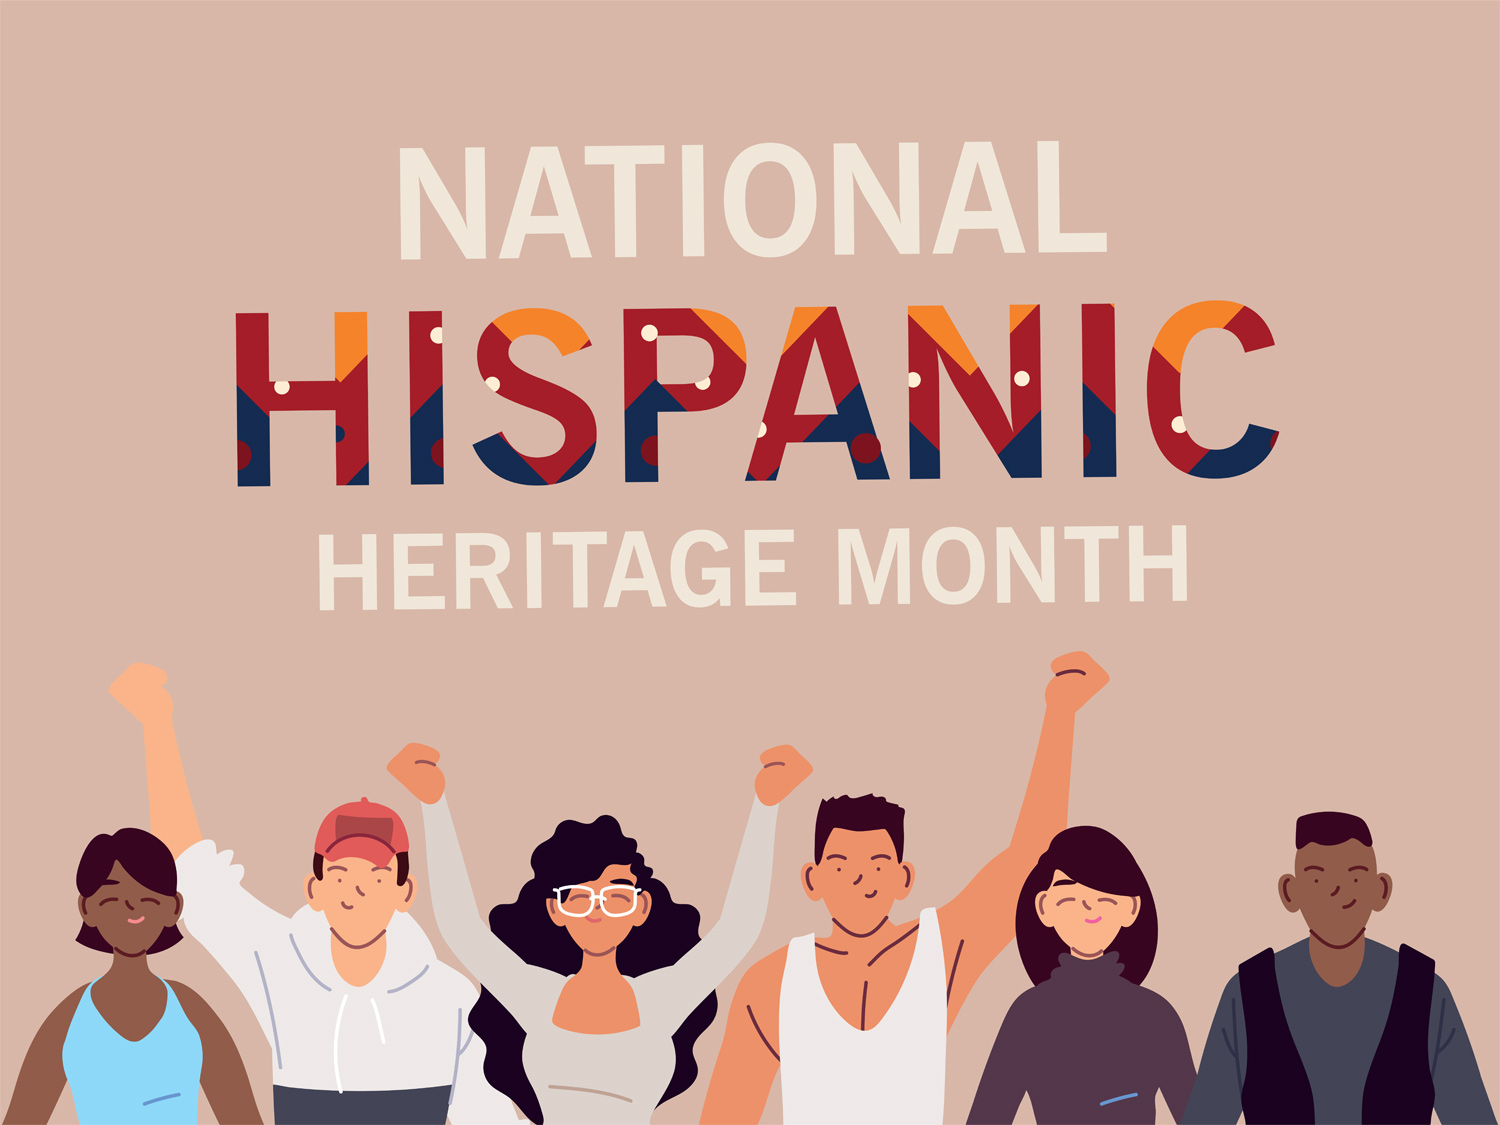 illustration with people of color reading "National Hispanic Heritage Month"